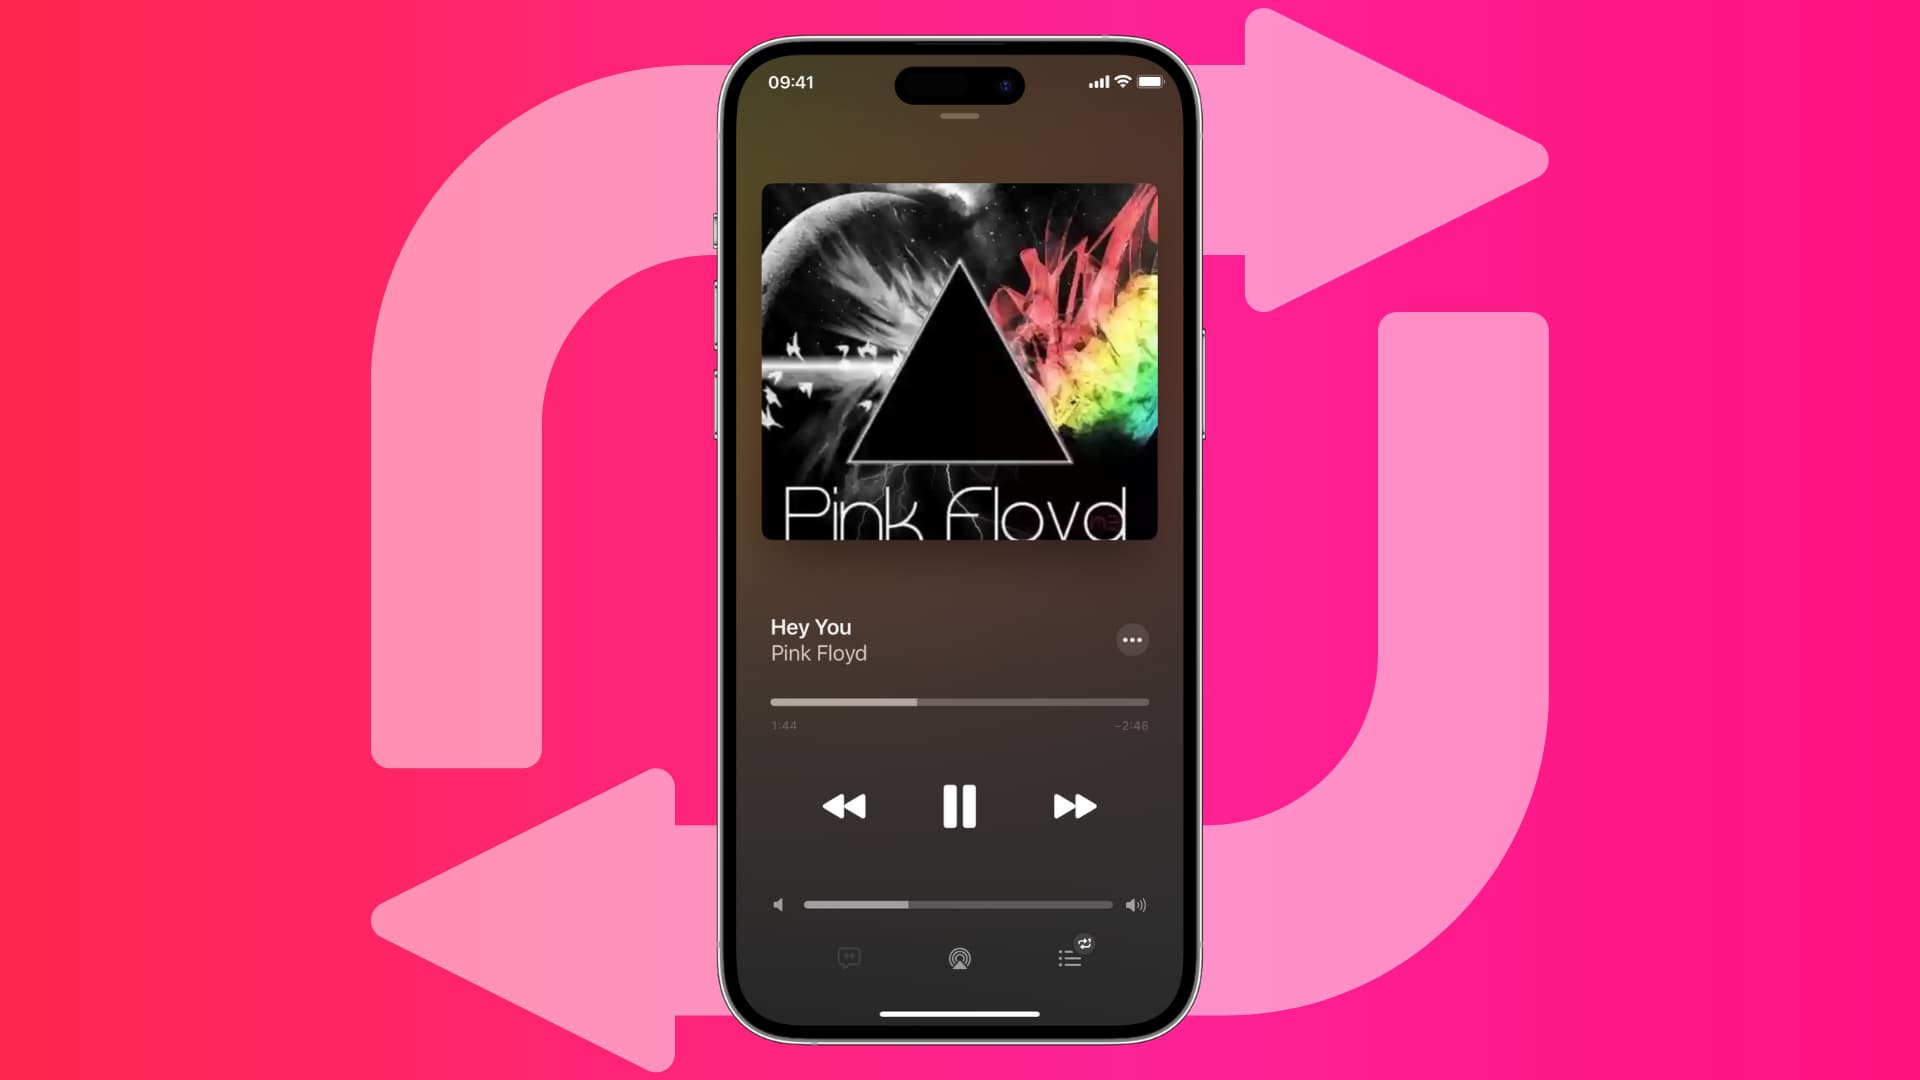 iPhone Music app showing the Now Playing screen with a repeat icon in the background